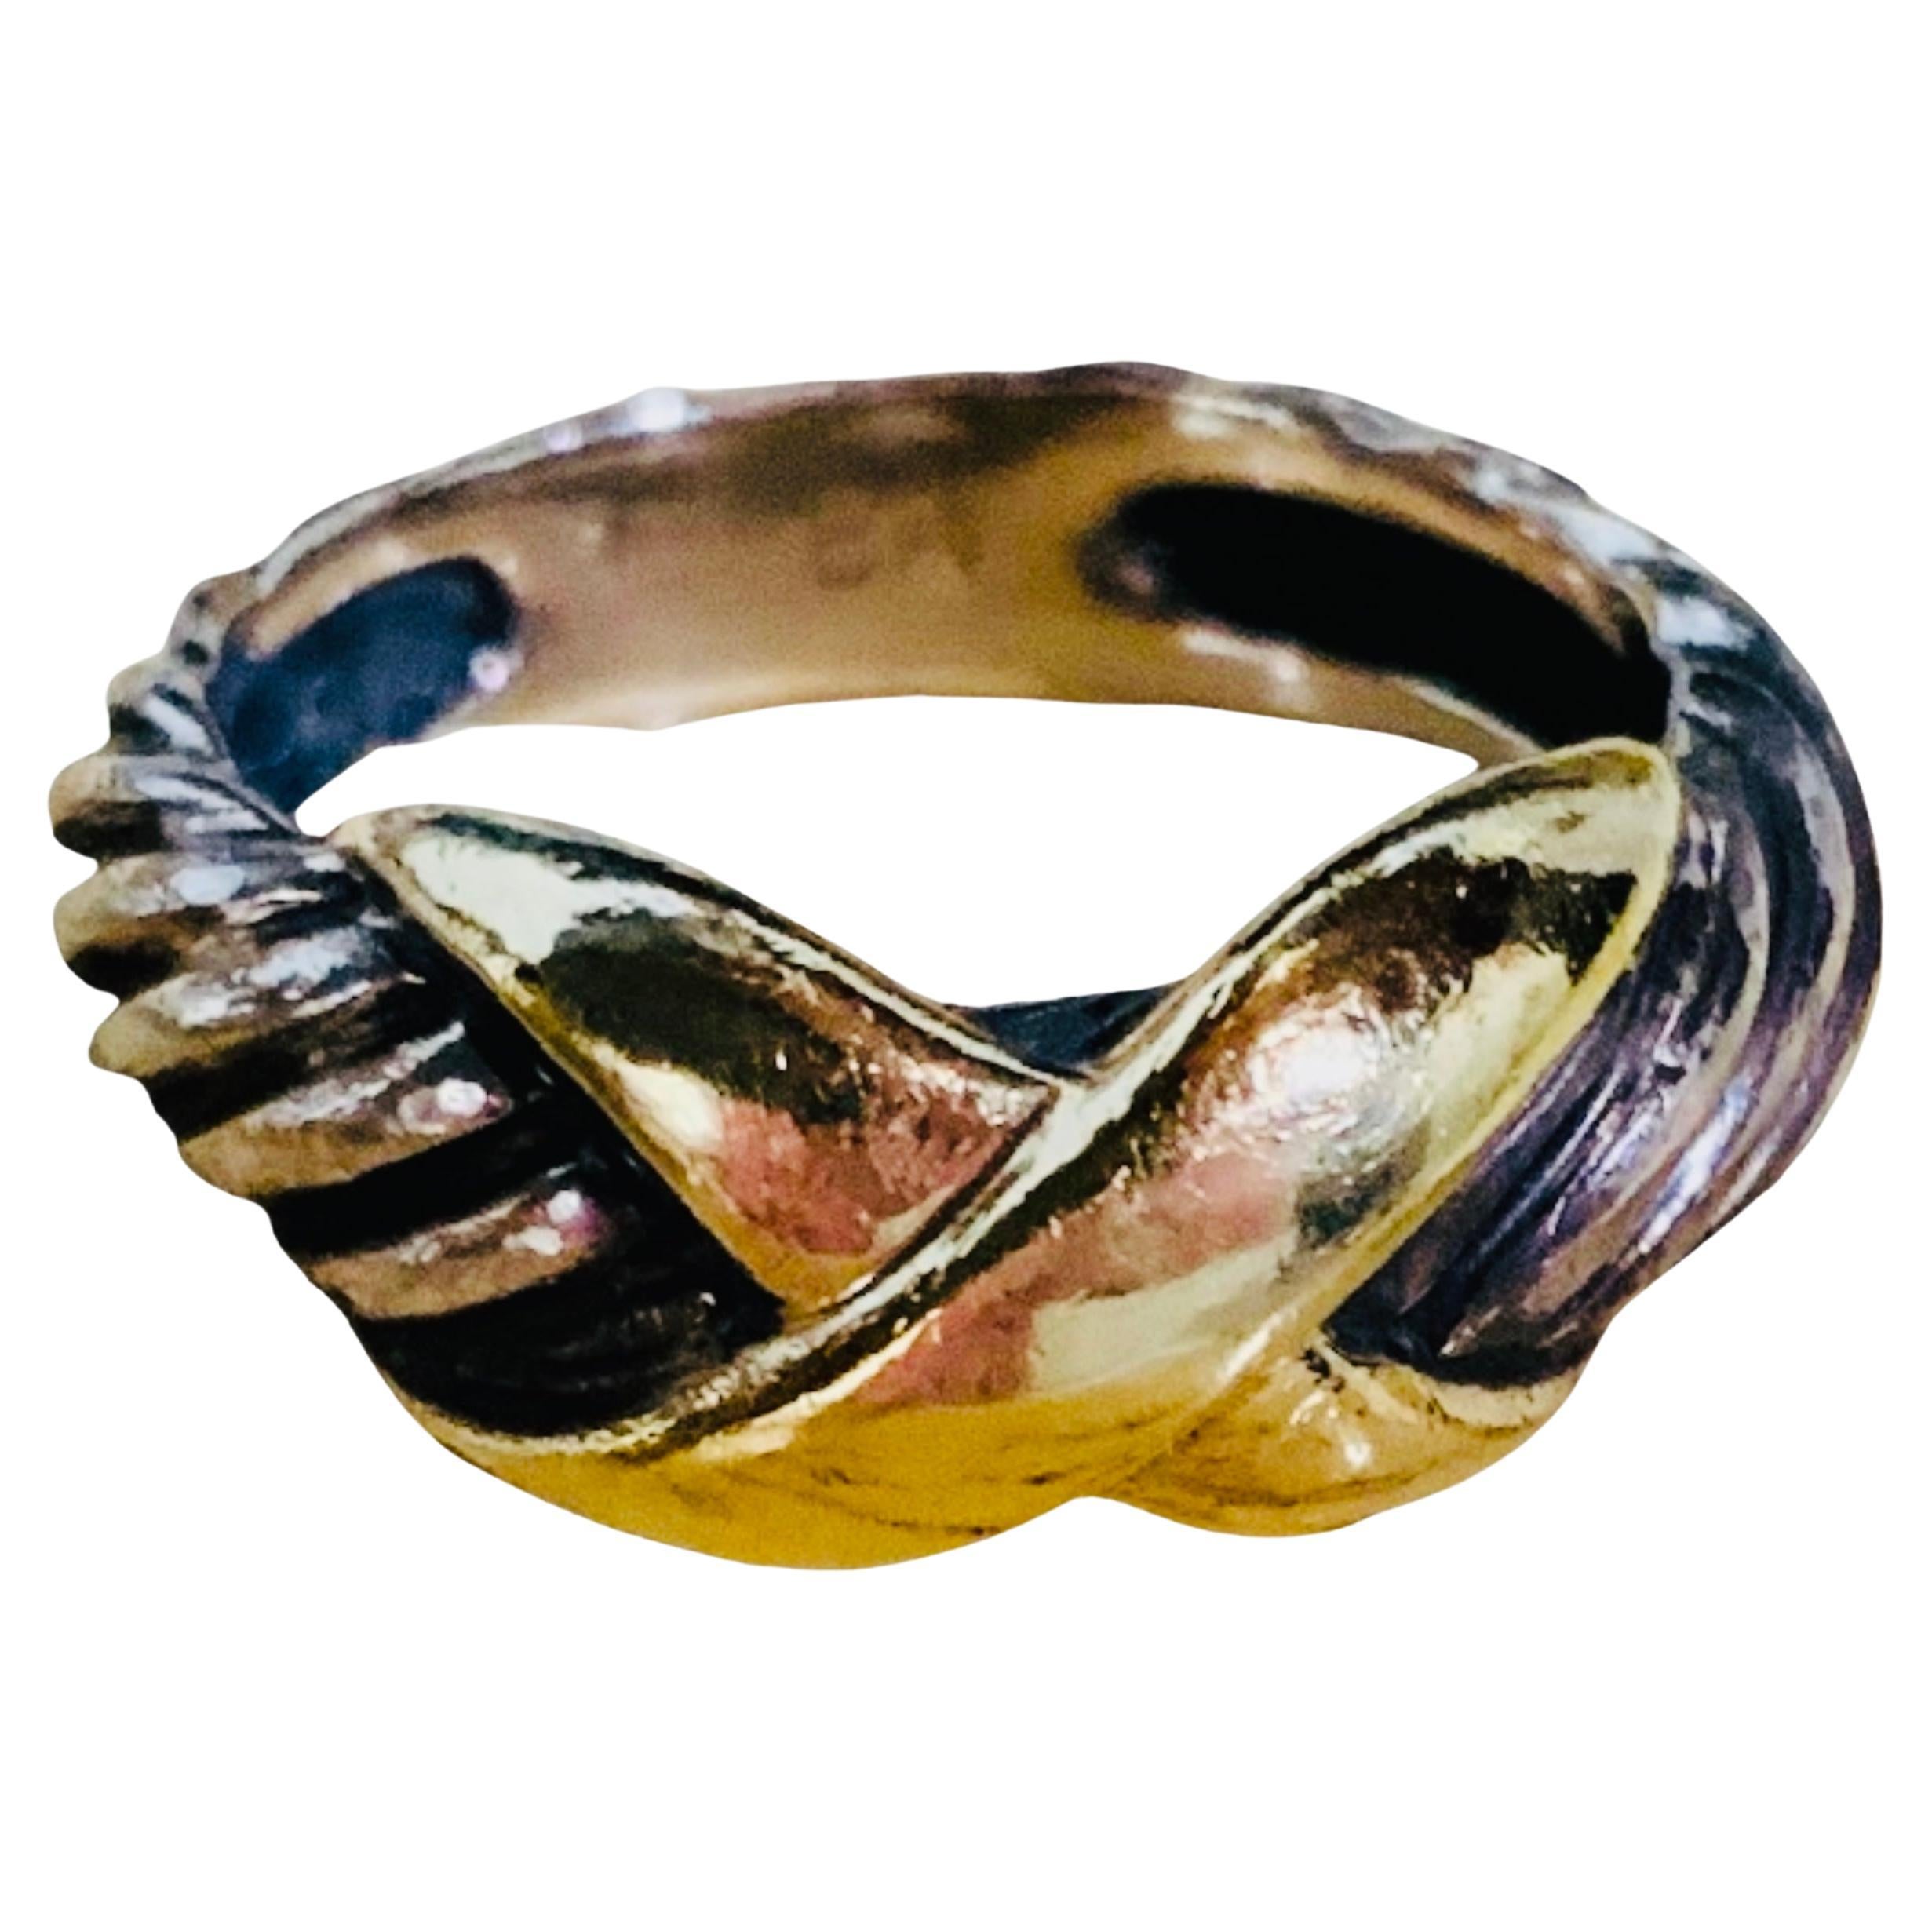 D. Yurman 14k Gold and 925 Sterling Silver Band Ring